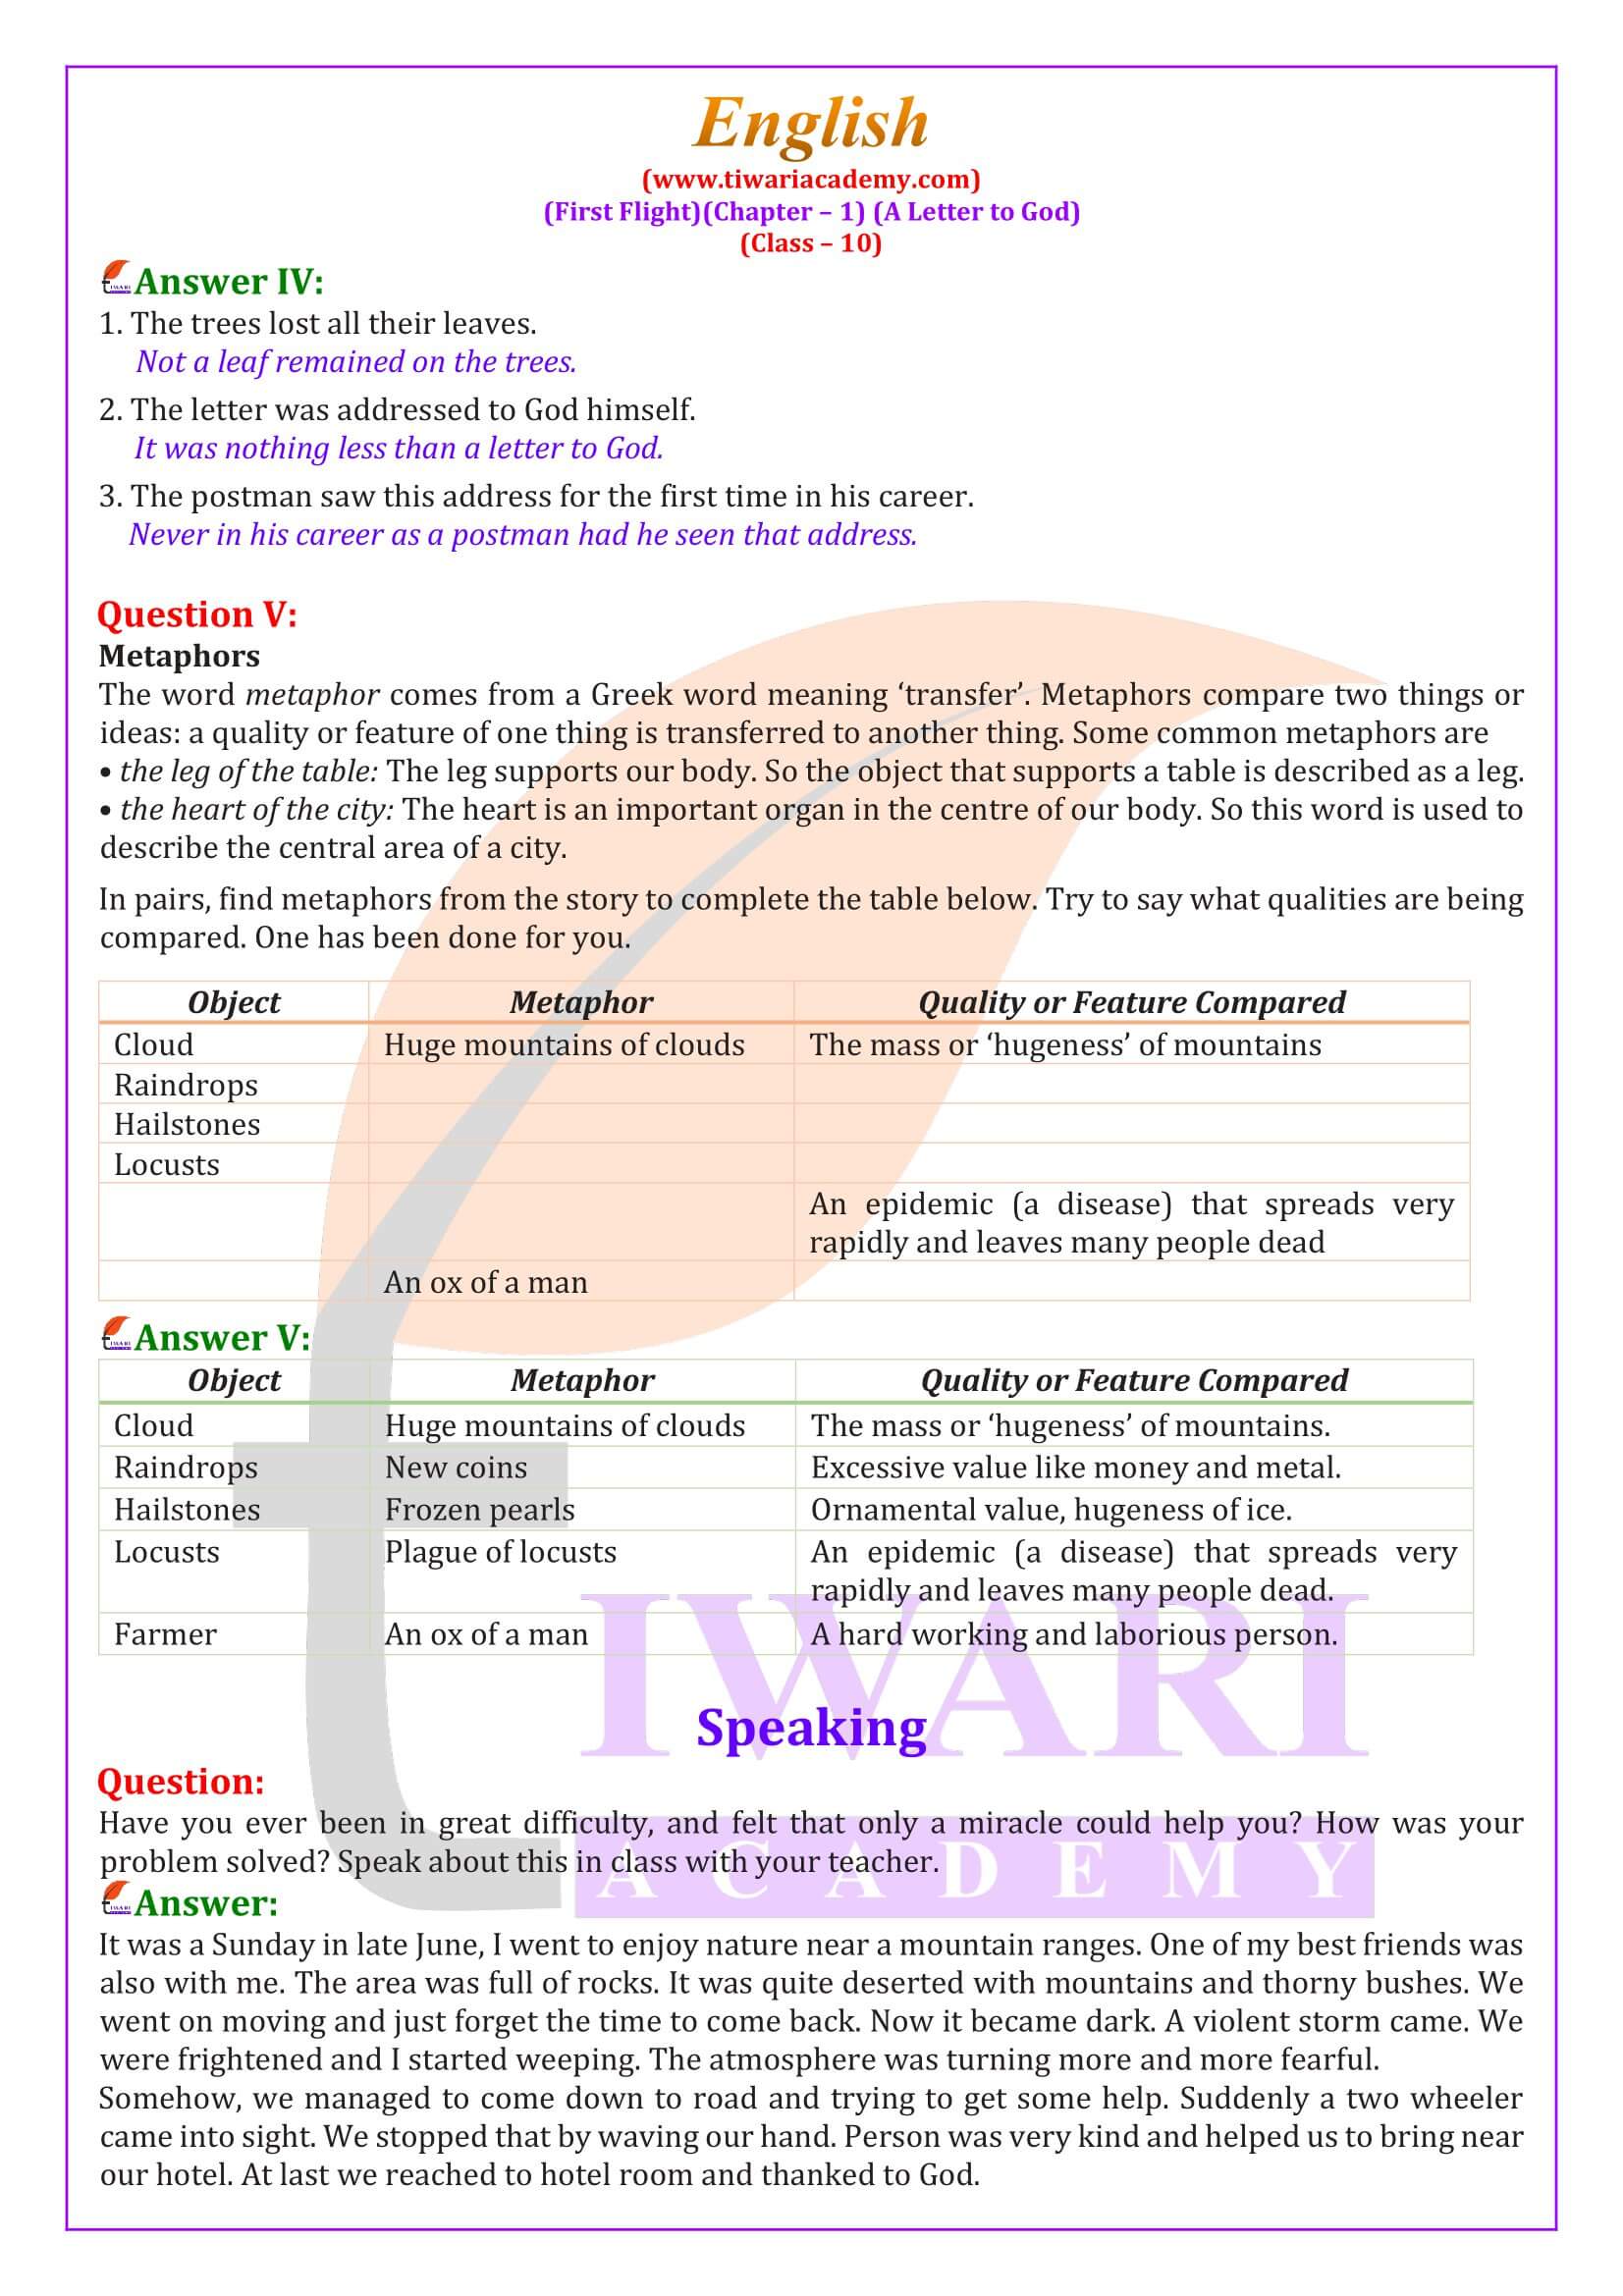 NCERT Solutions for Class 10 English First Flight Chapter 1